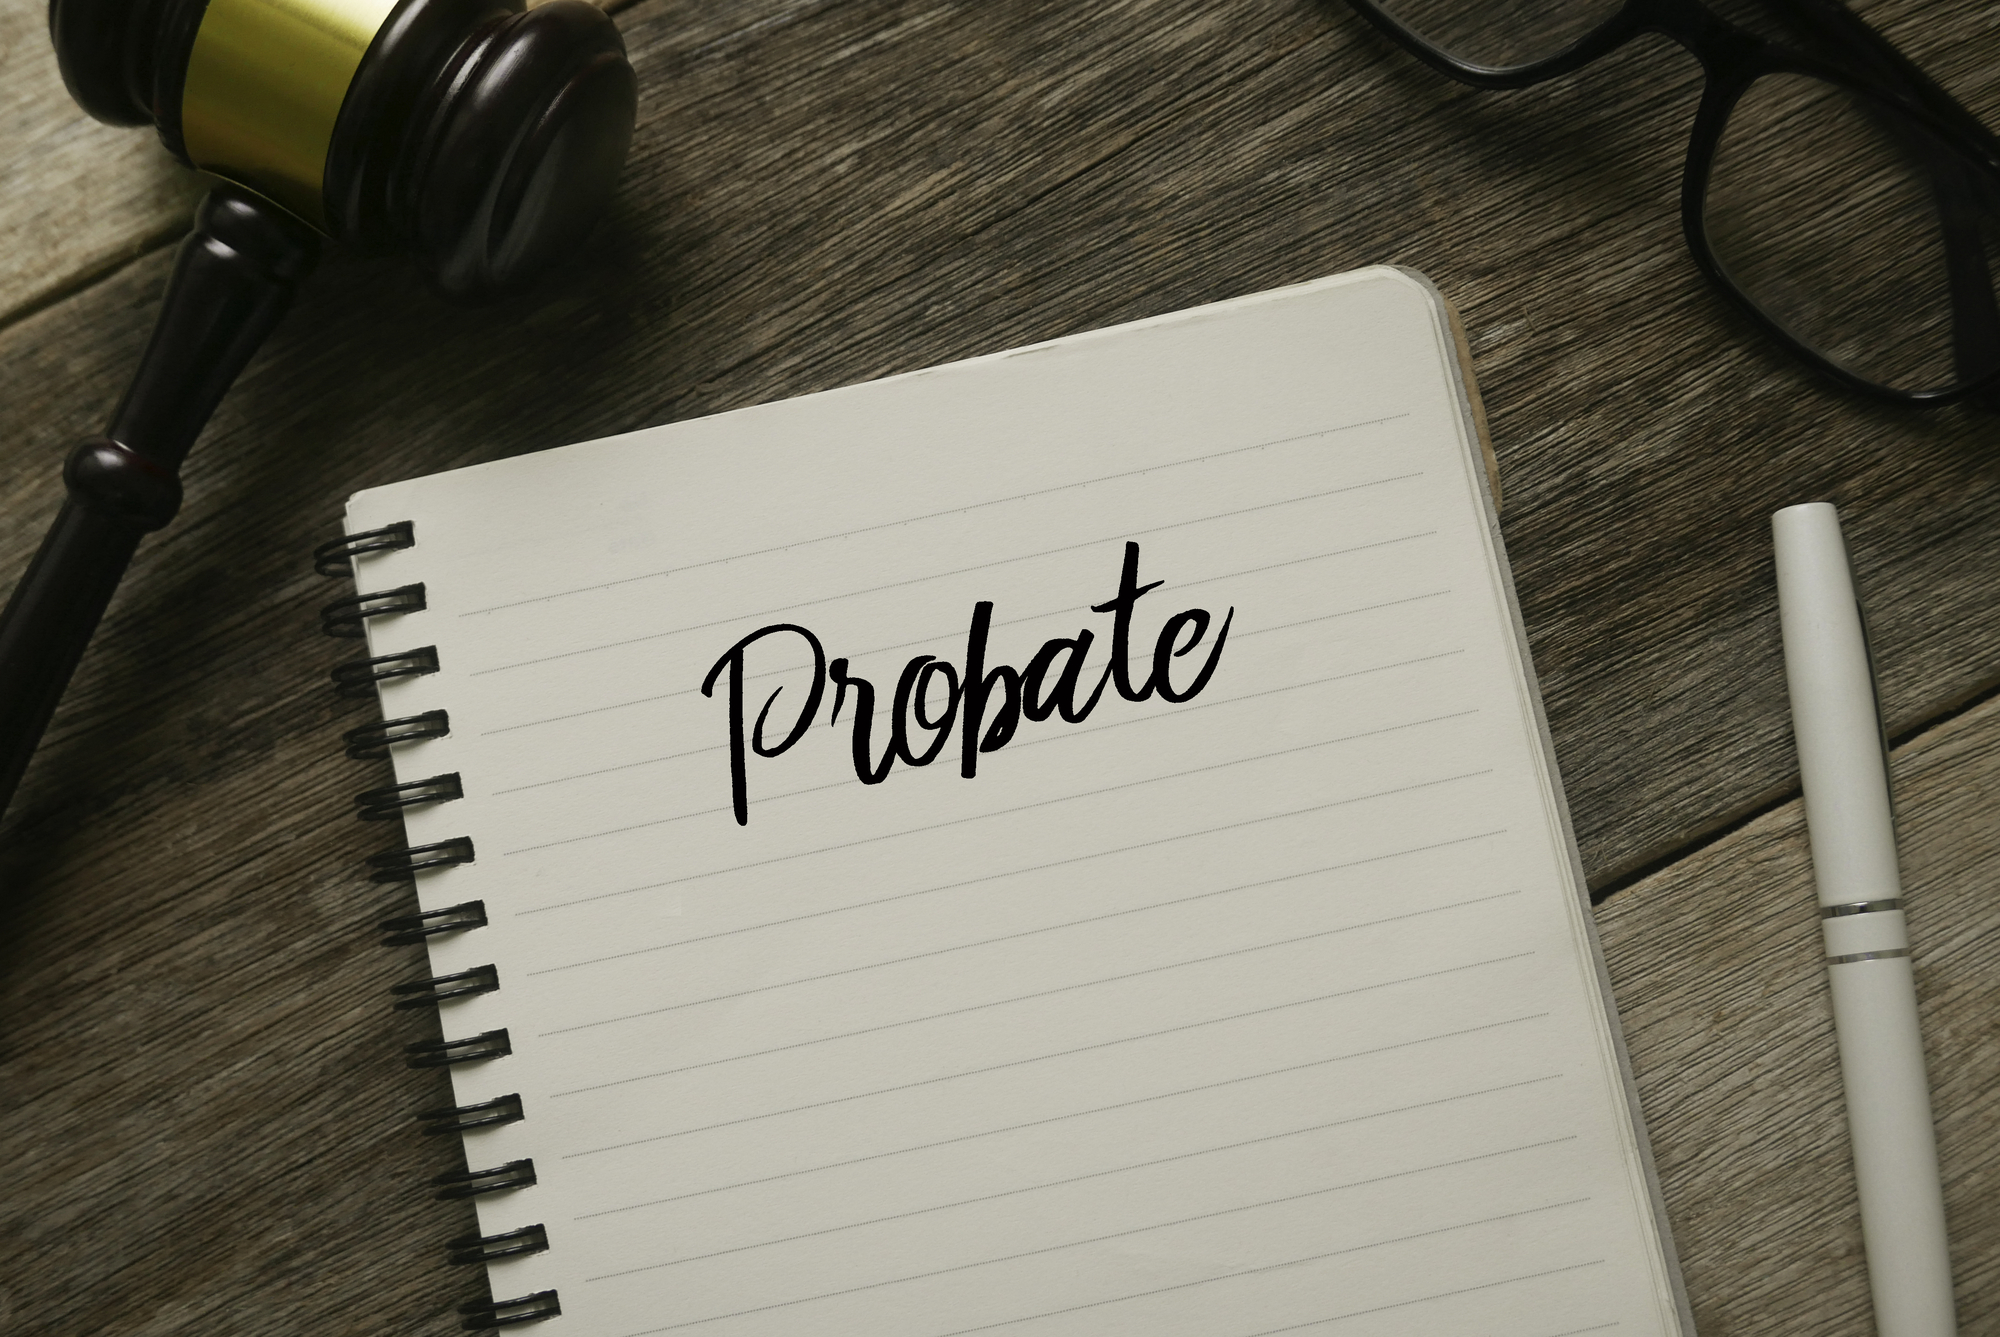 Probate 2022 – What To Expect